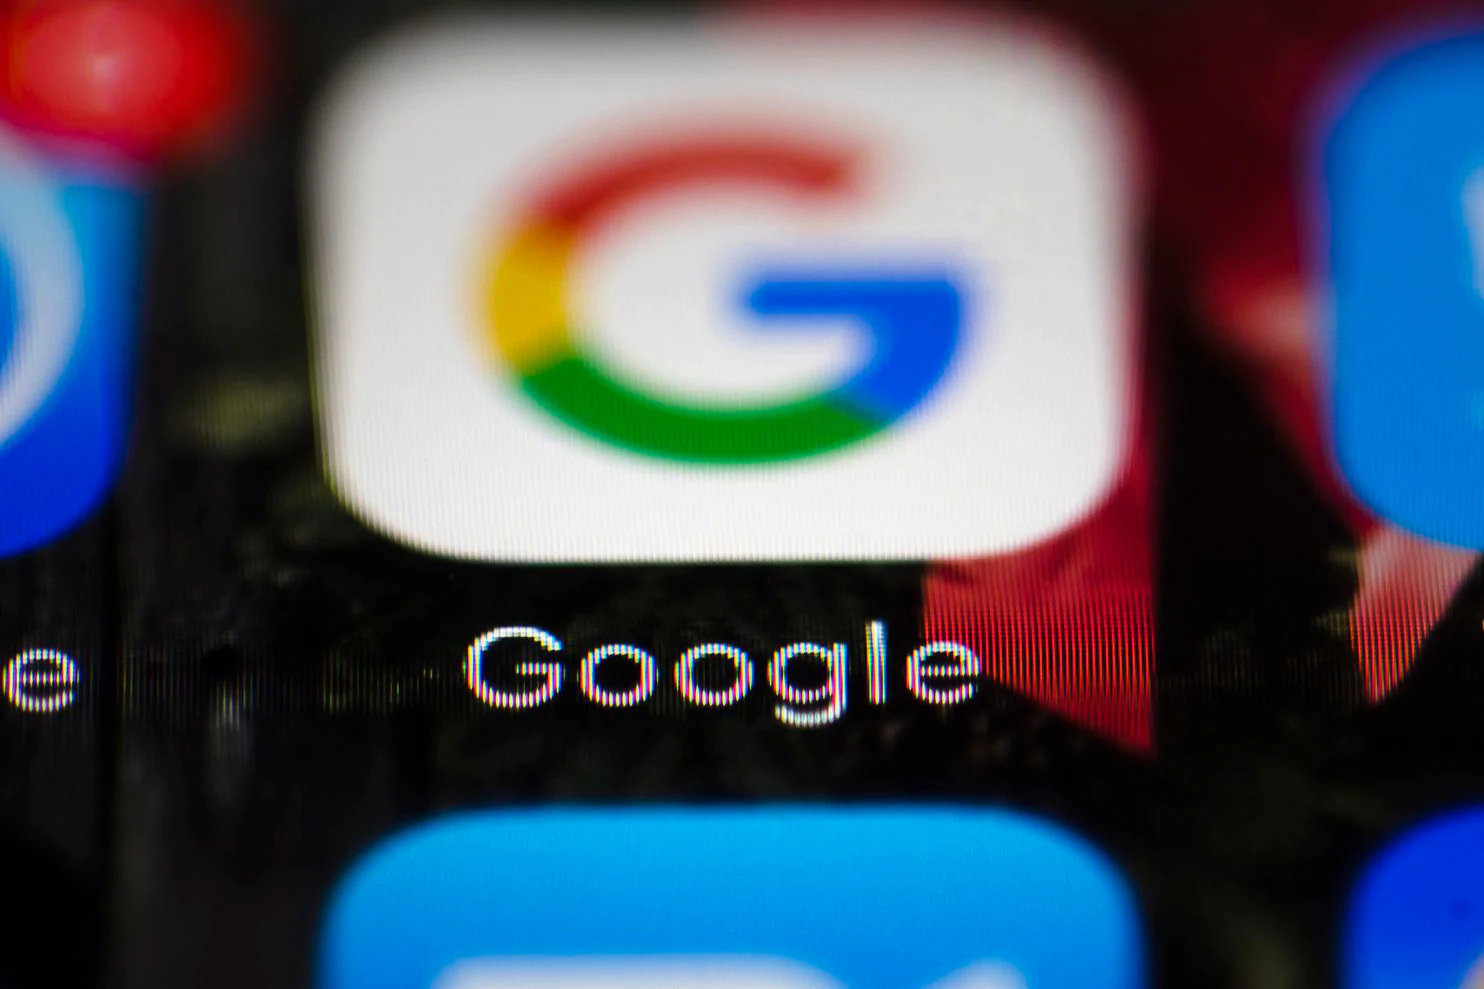 Arizona sues Google over allegations it illegally tracked Android smartphone users’ locations